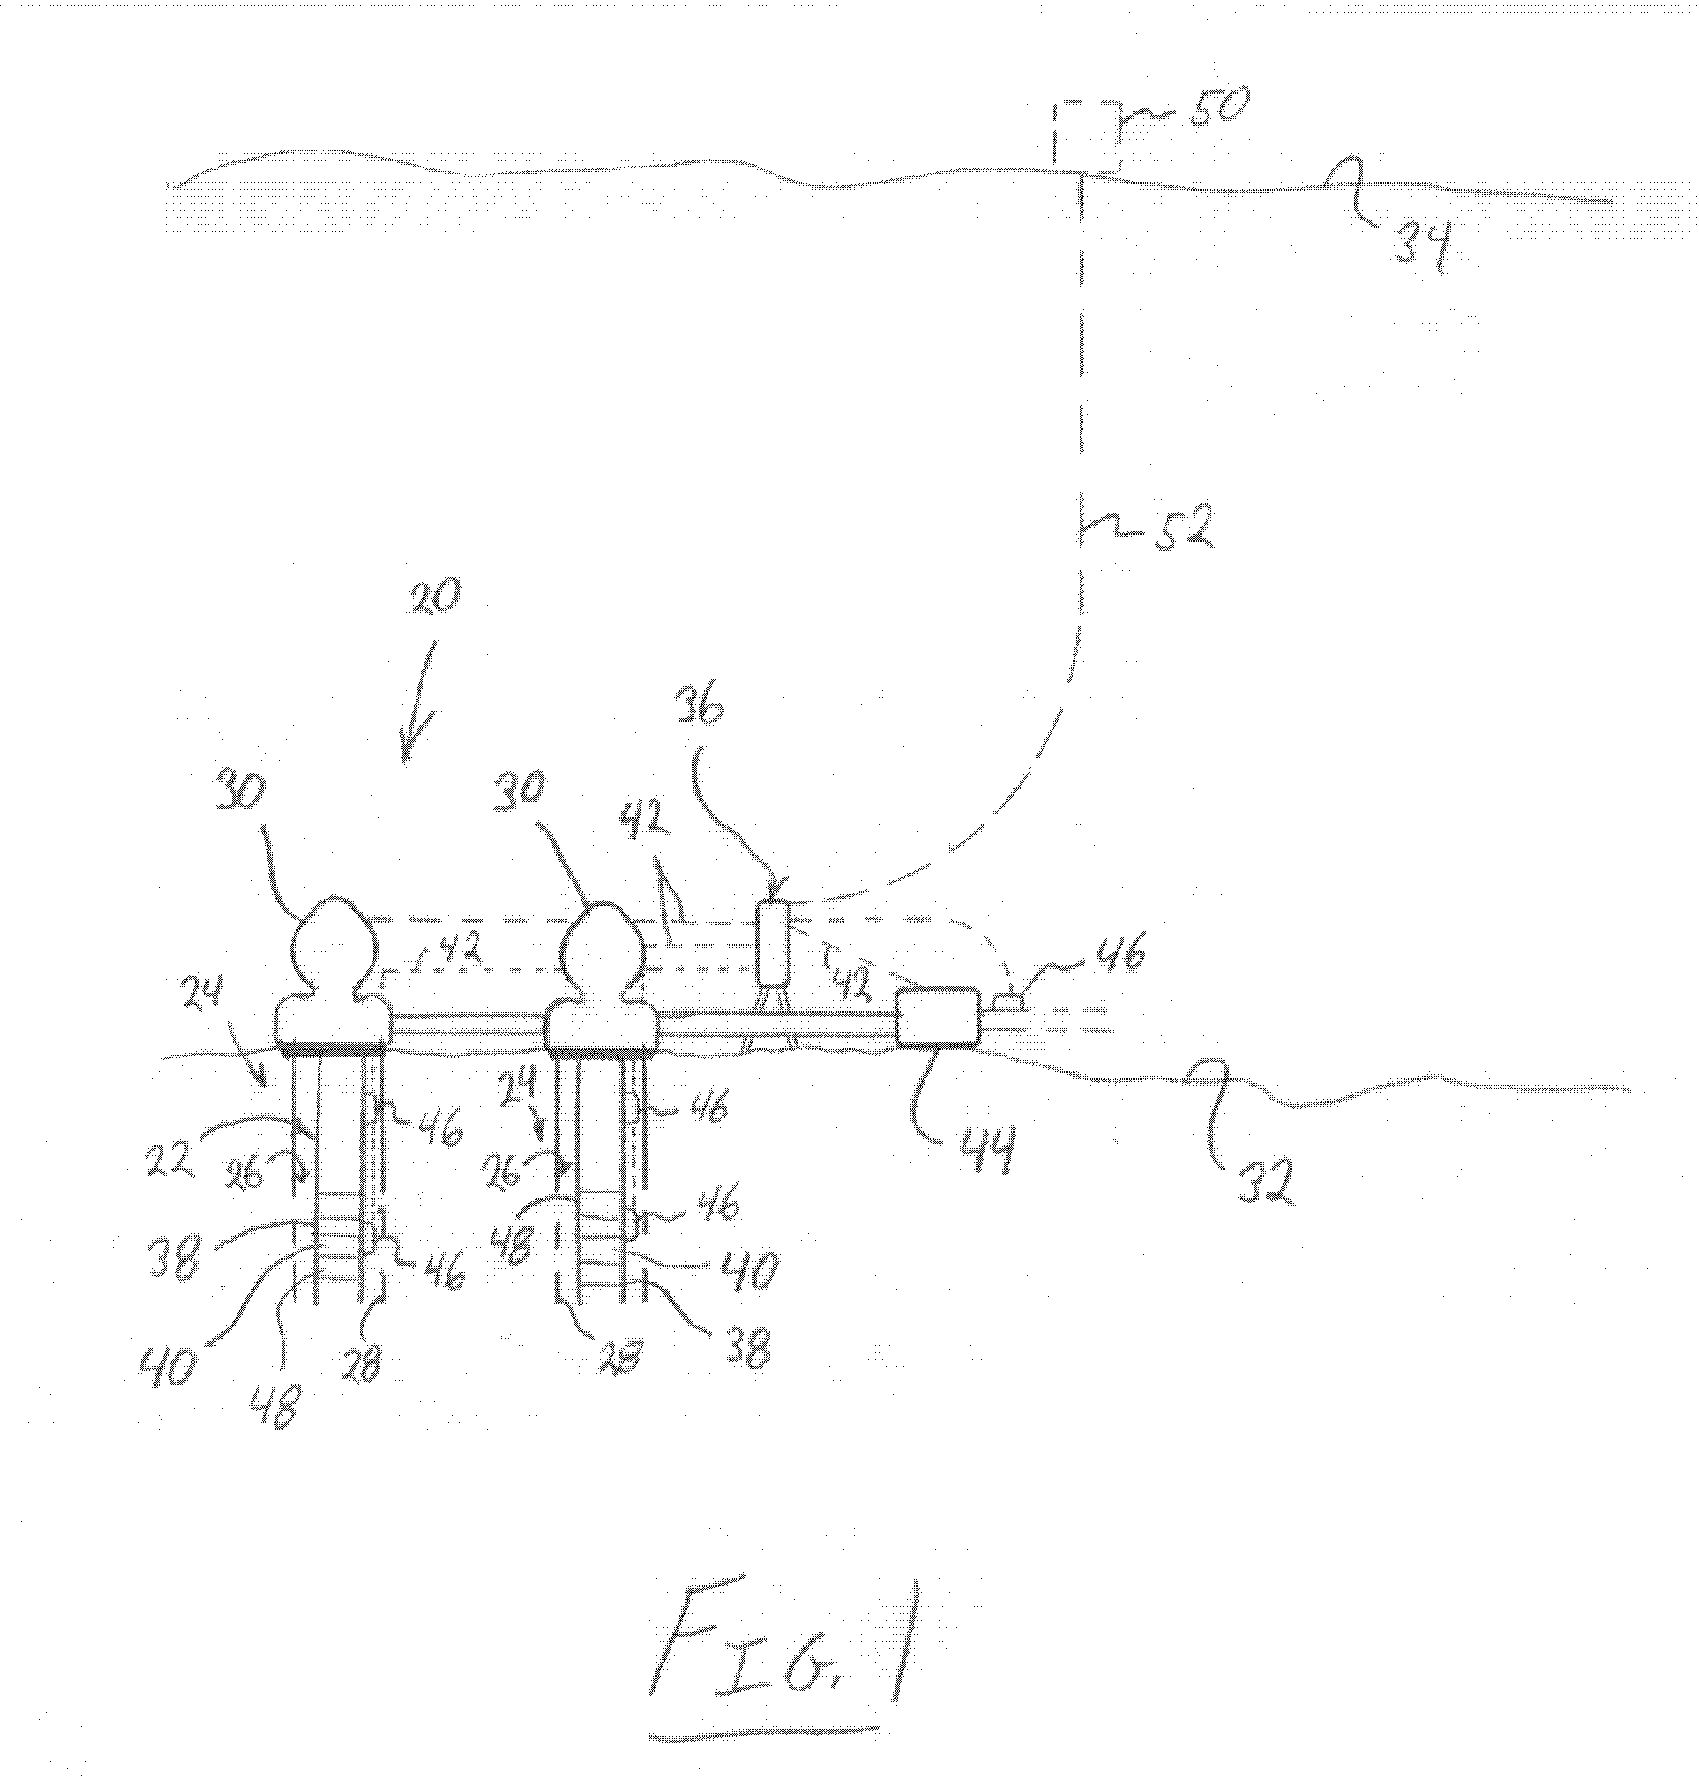 System and Method for Controlling Subsea Wells